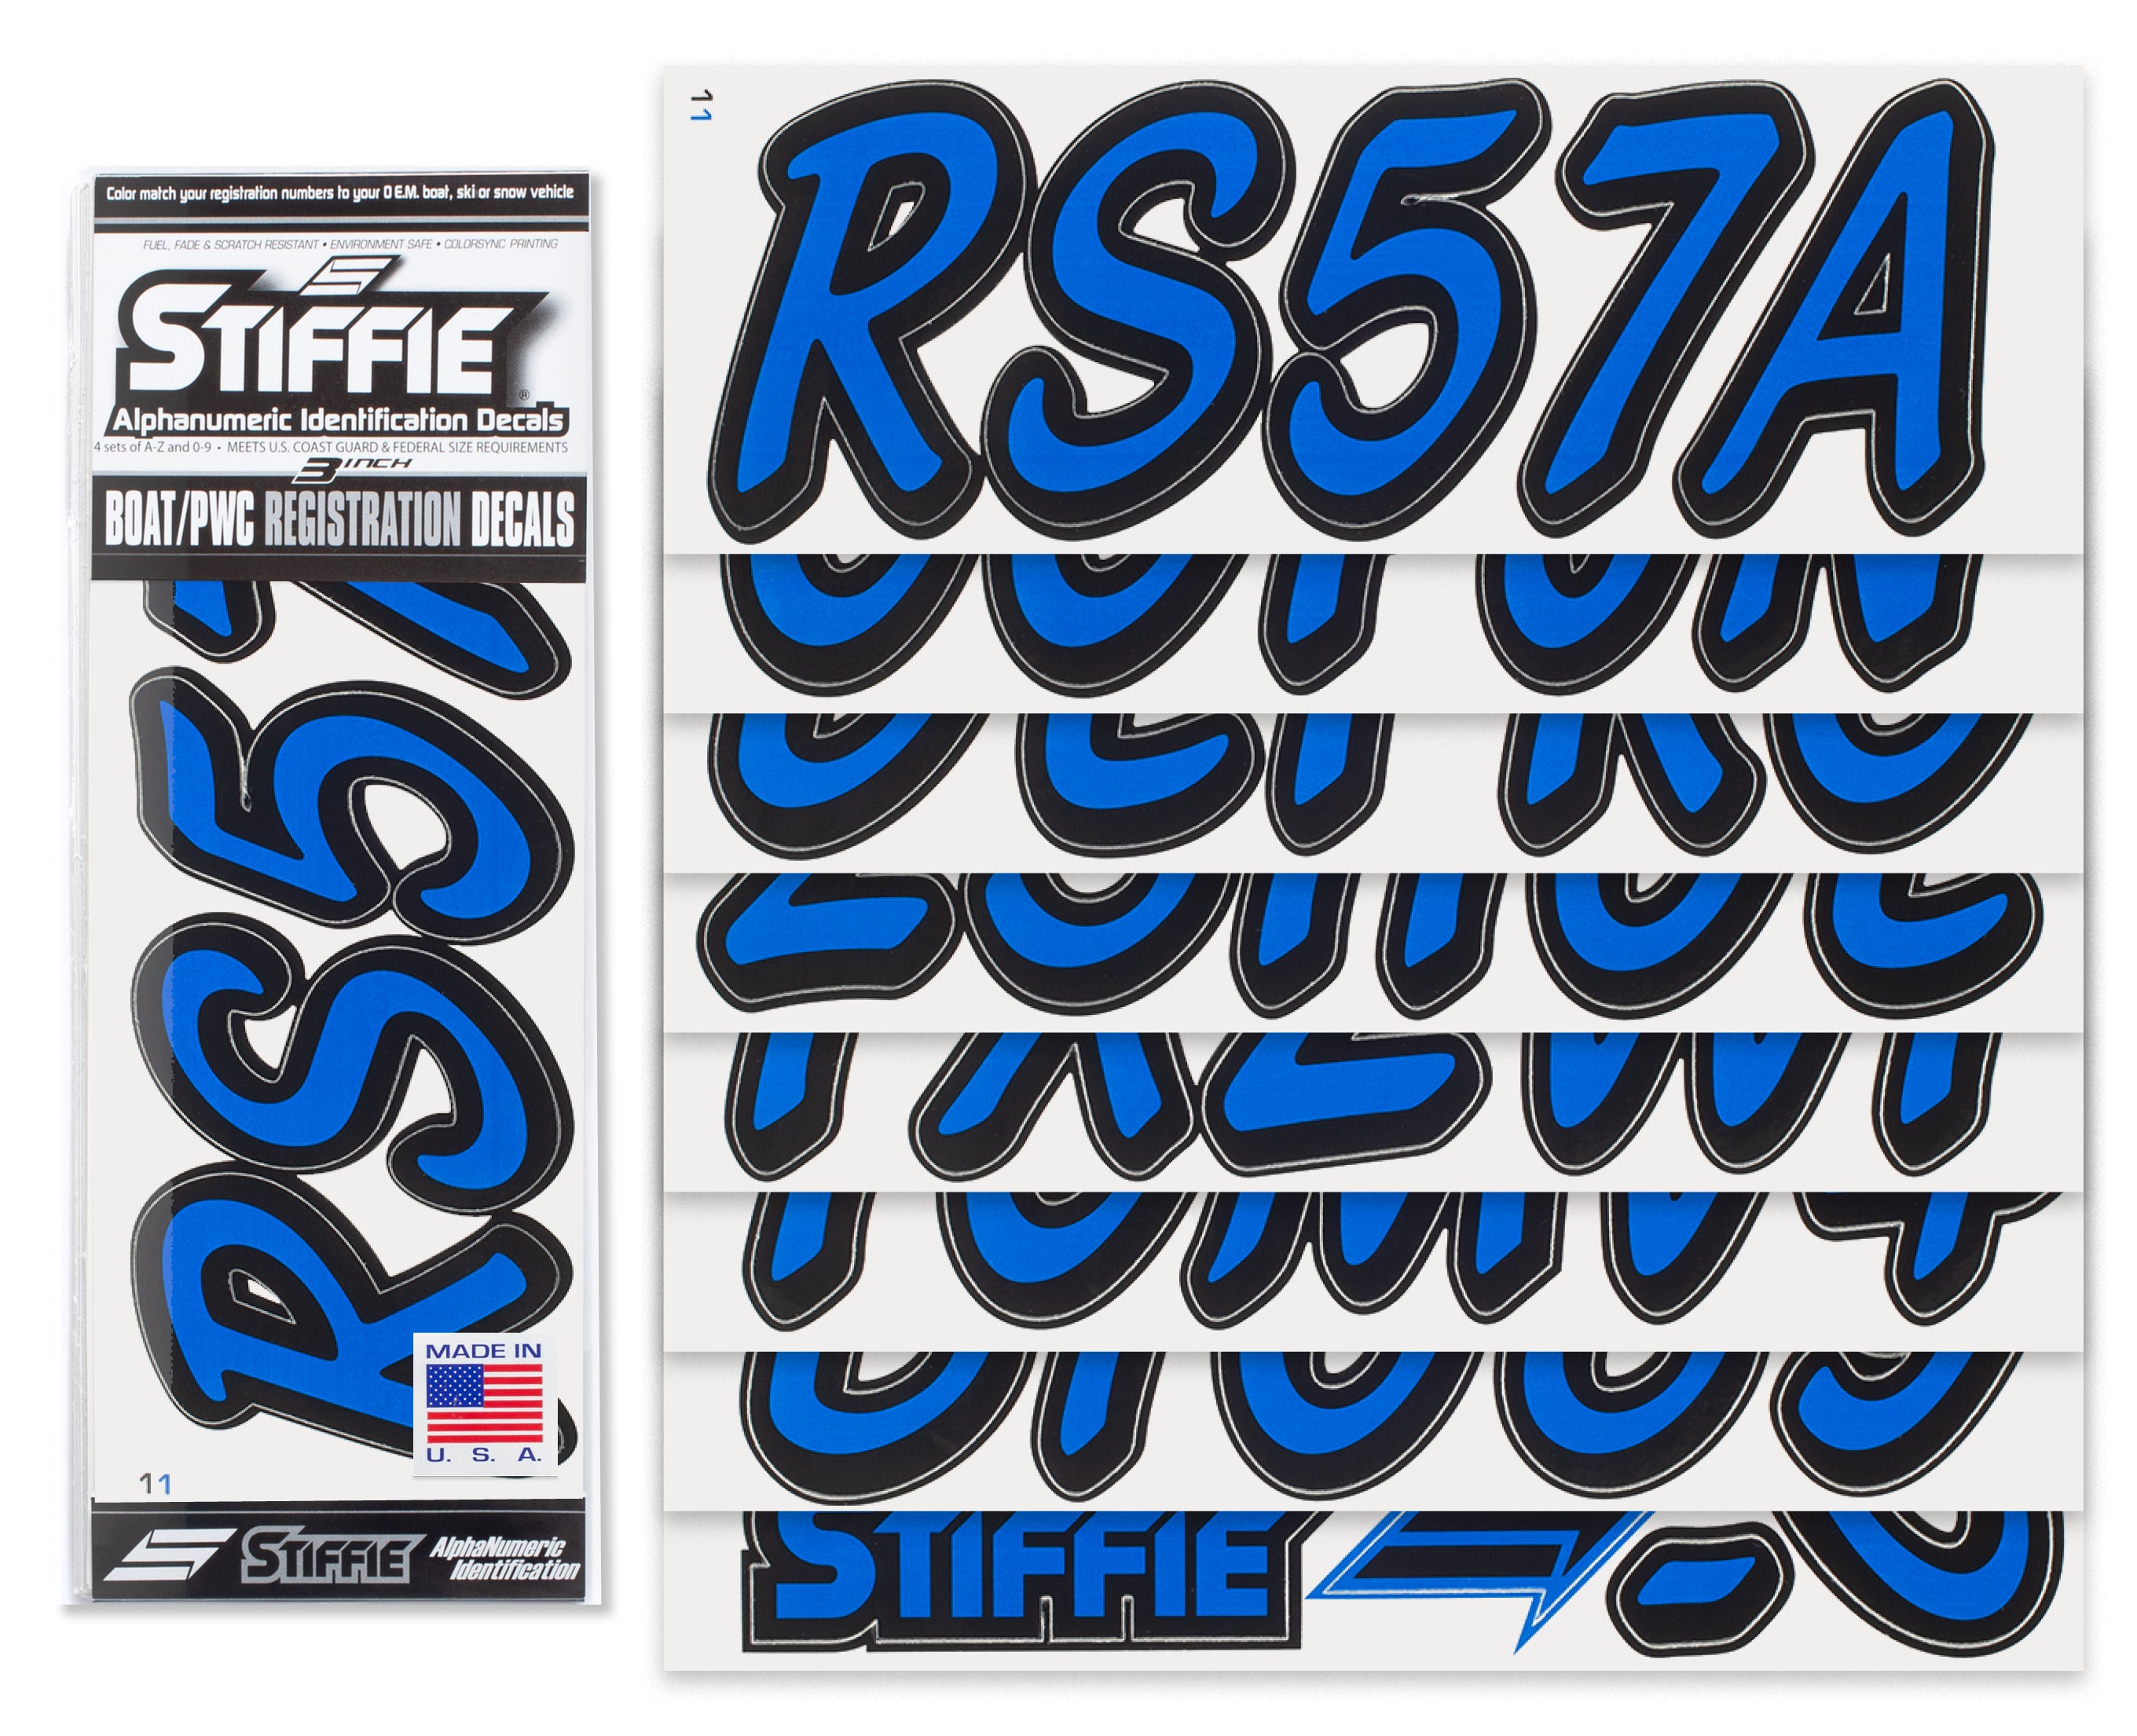 STIFFIE Whipline Solid Blue/Black 3" Alpha-Numeric Registration Identification Numbers Stickers Decals for Boats & Personal Watercraft